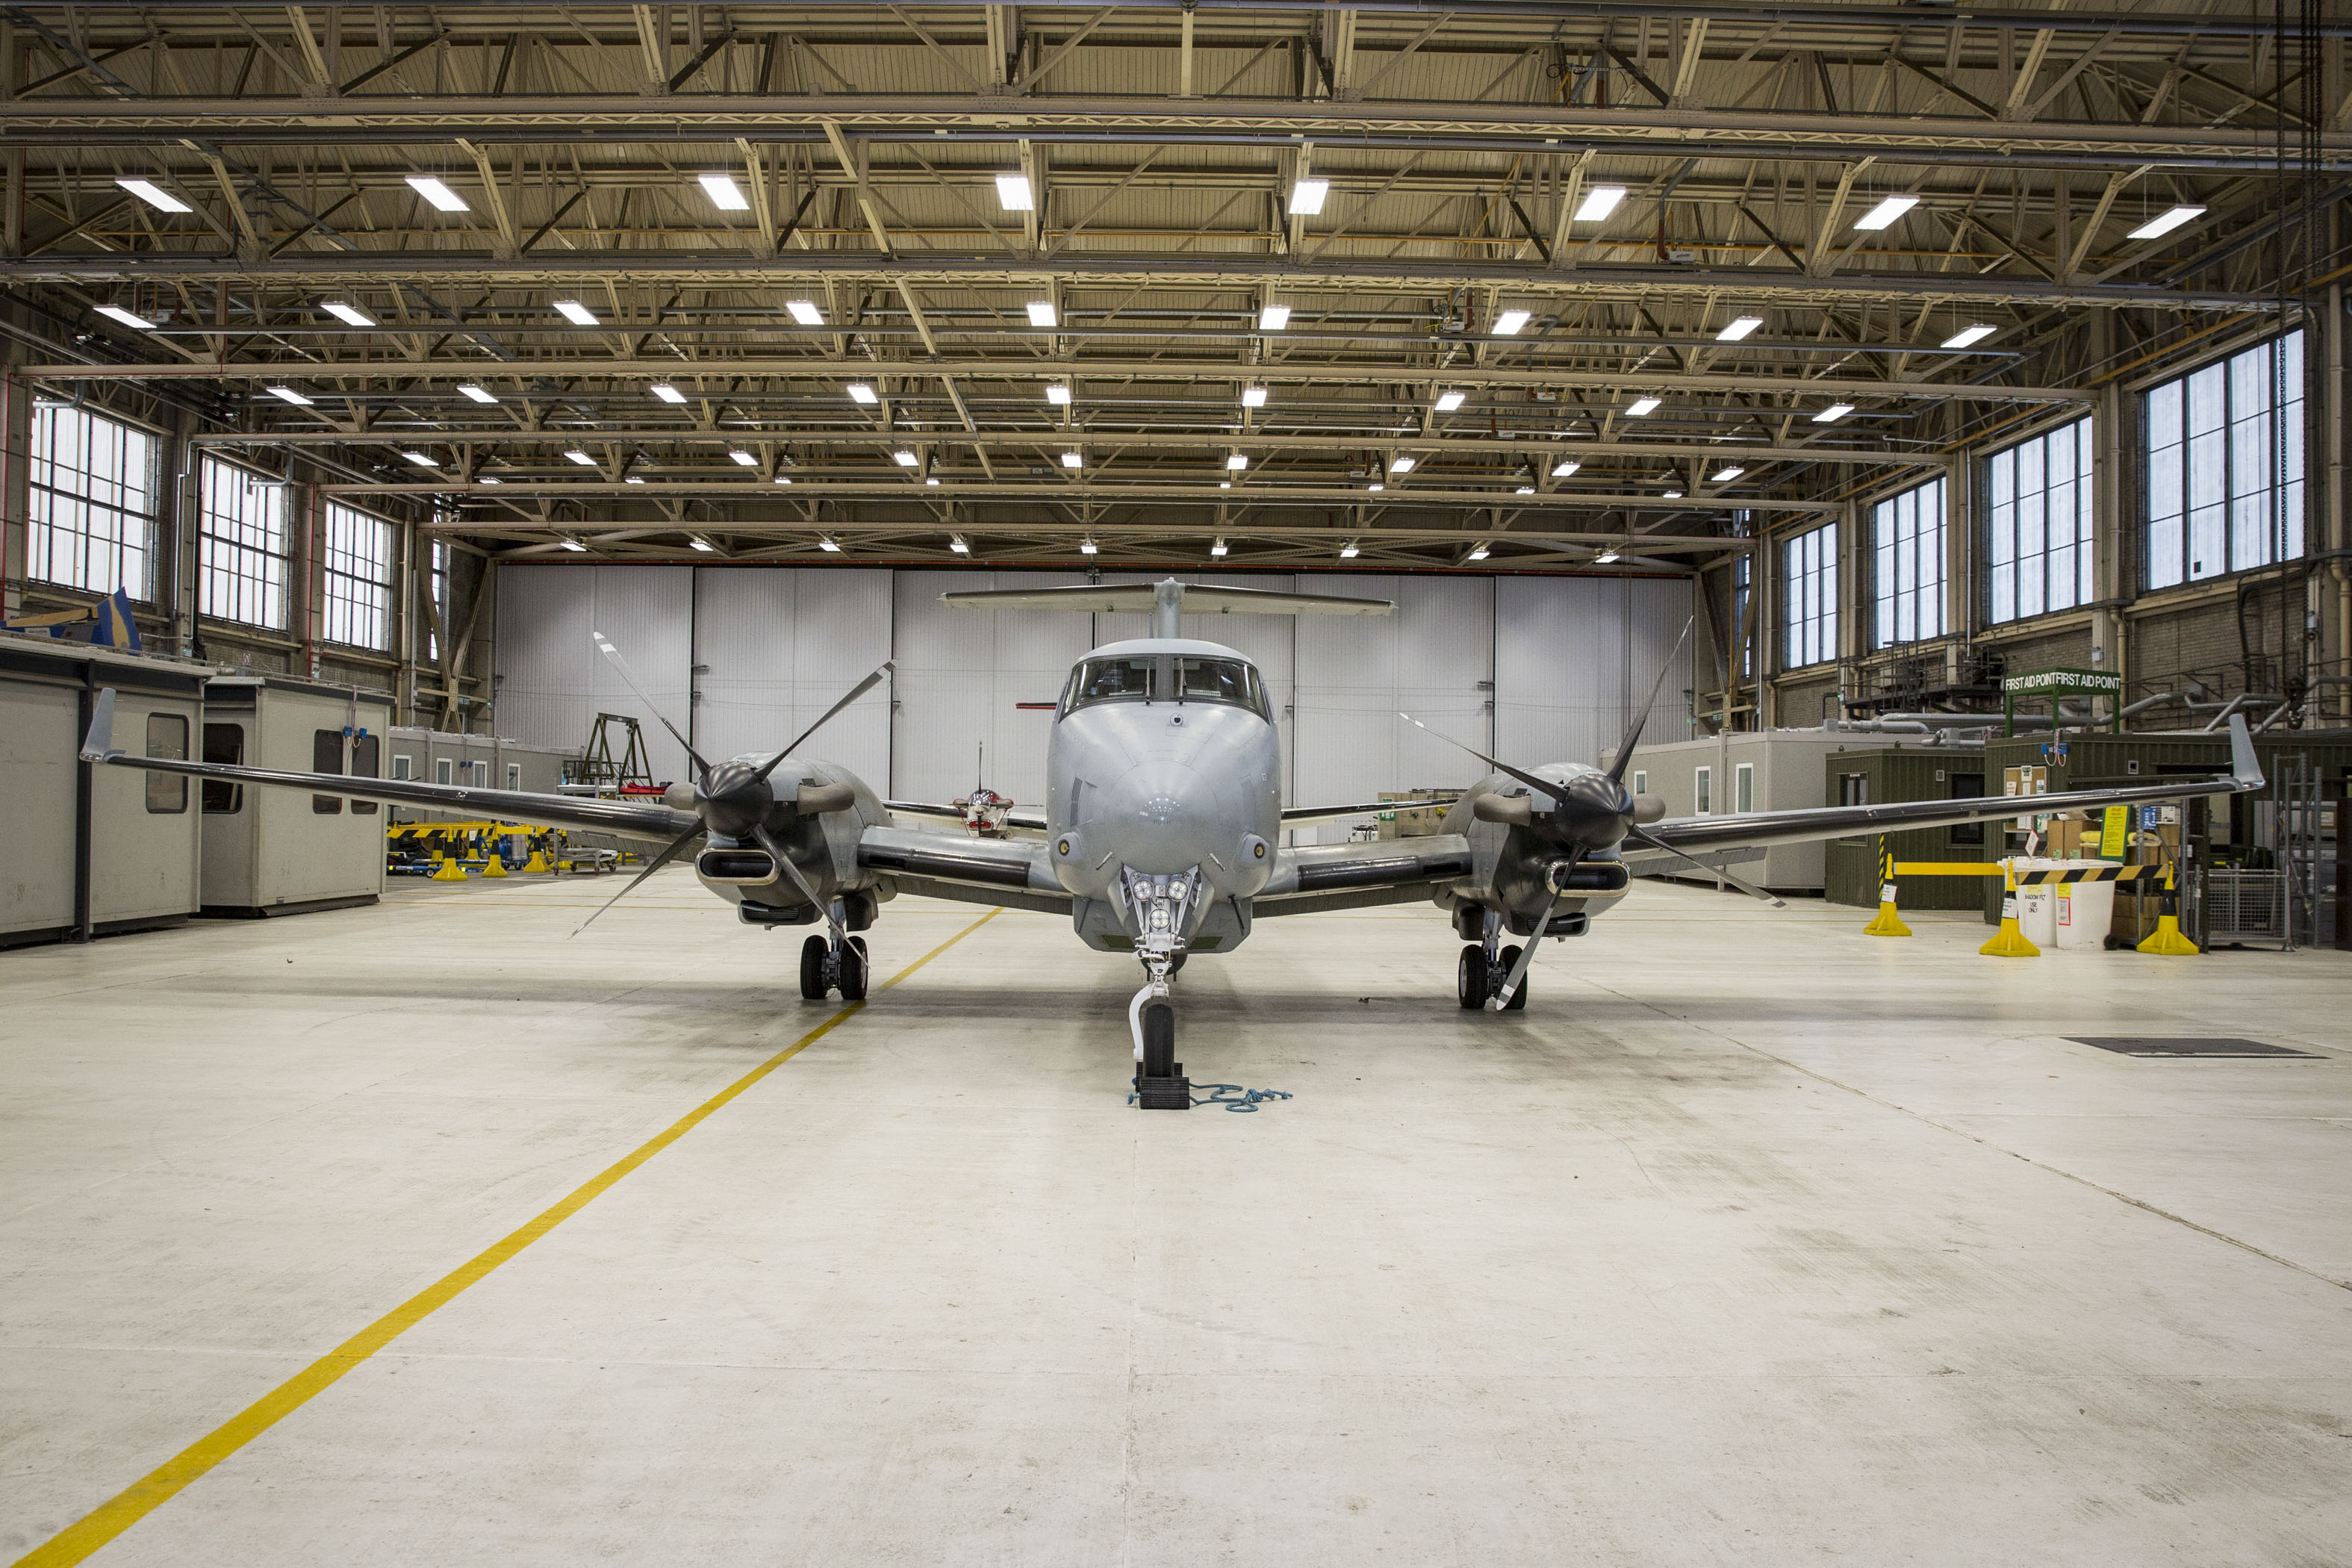 Image shows RAF Shadow aircraft in the hangar.